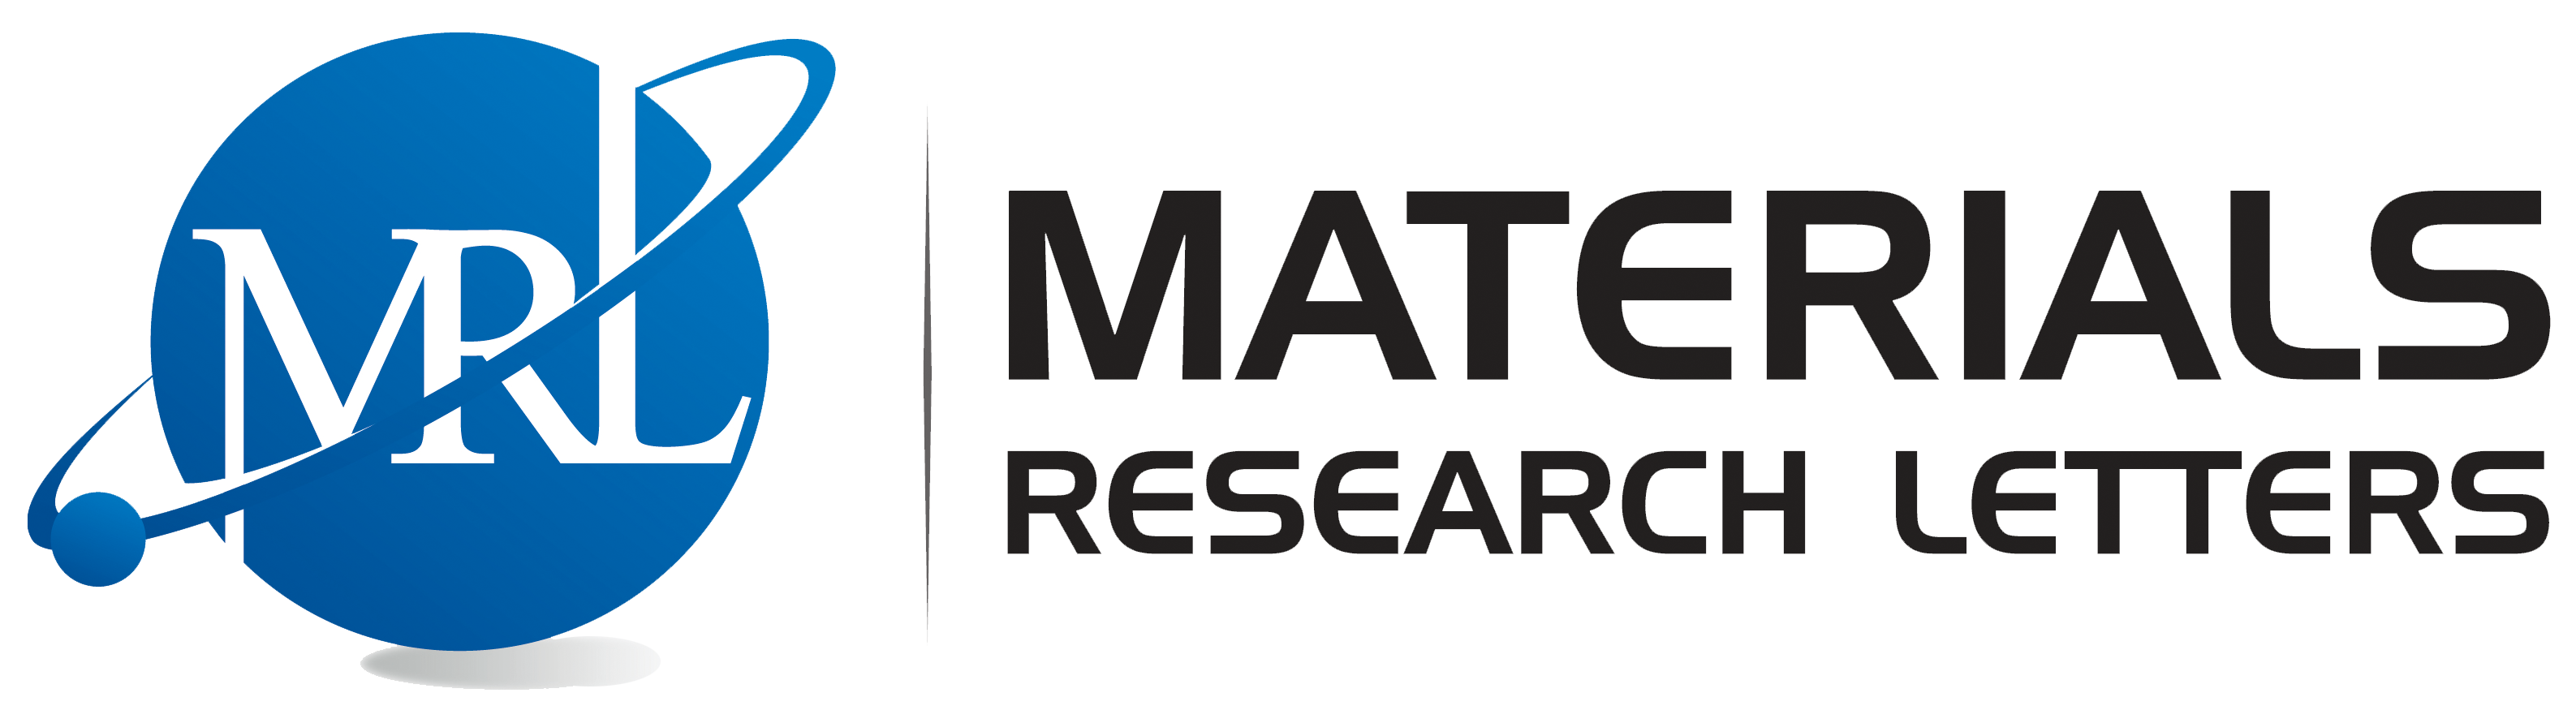 Materials Research Letters